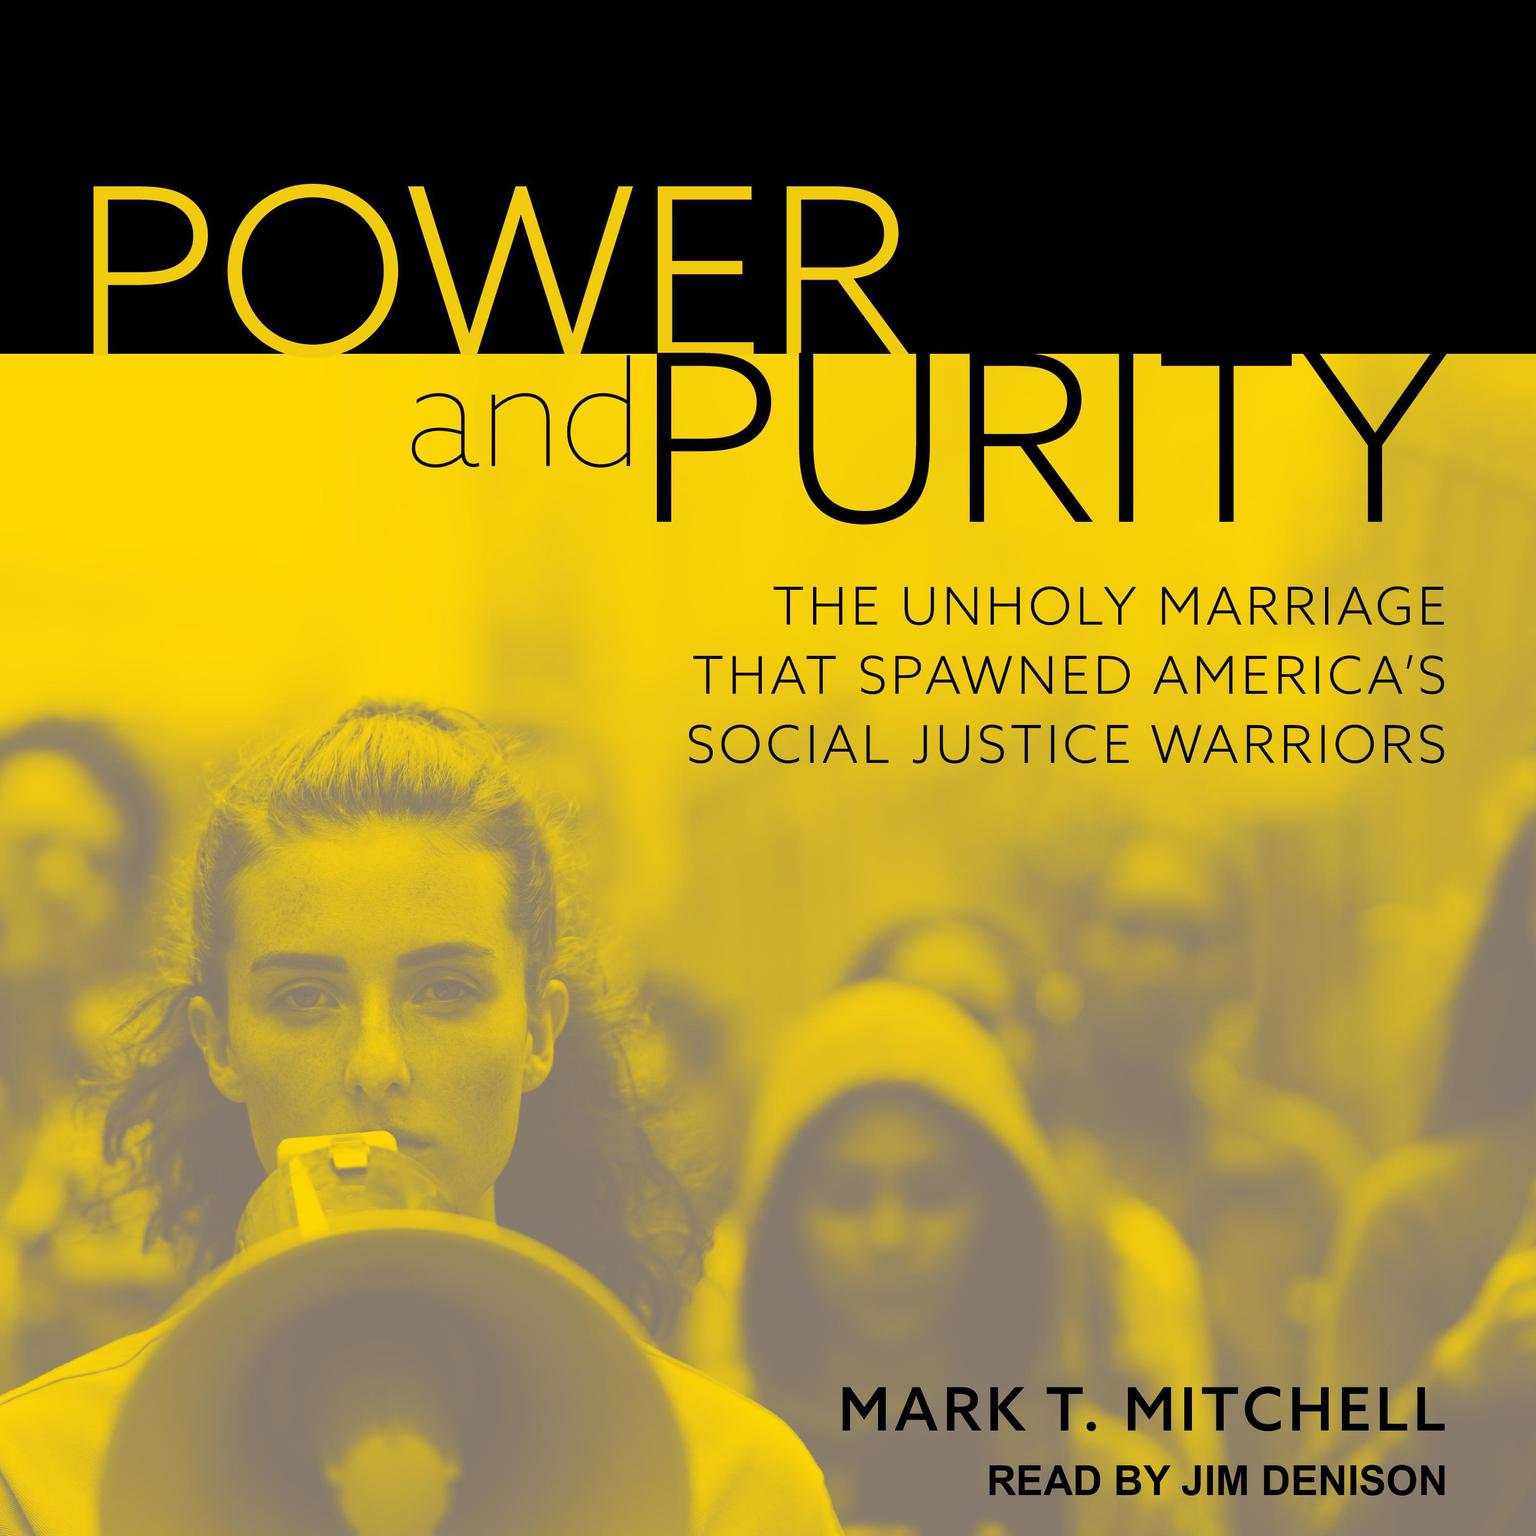 Power and Purity: The Unholy Marriage That Spawned Americas Social Justice Warriors Audiobook, by Mark T. Mitchell